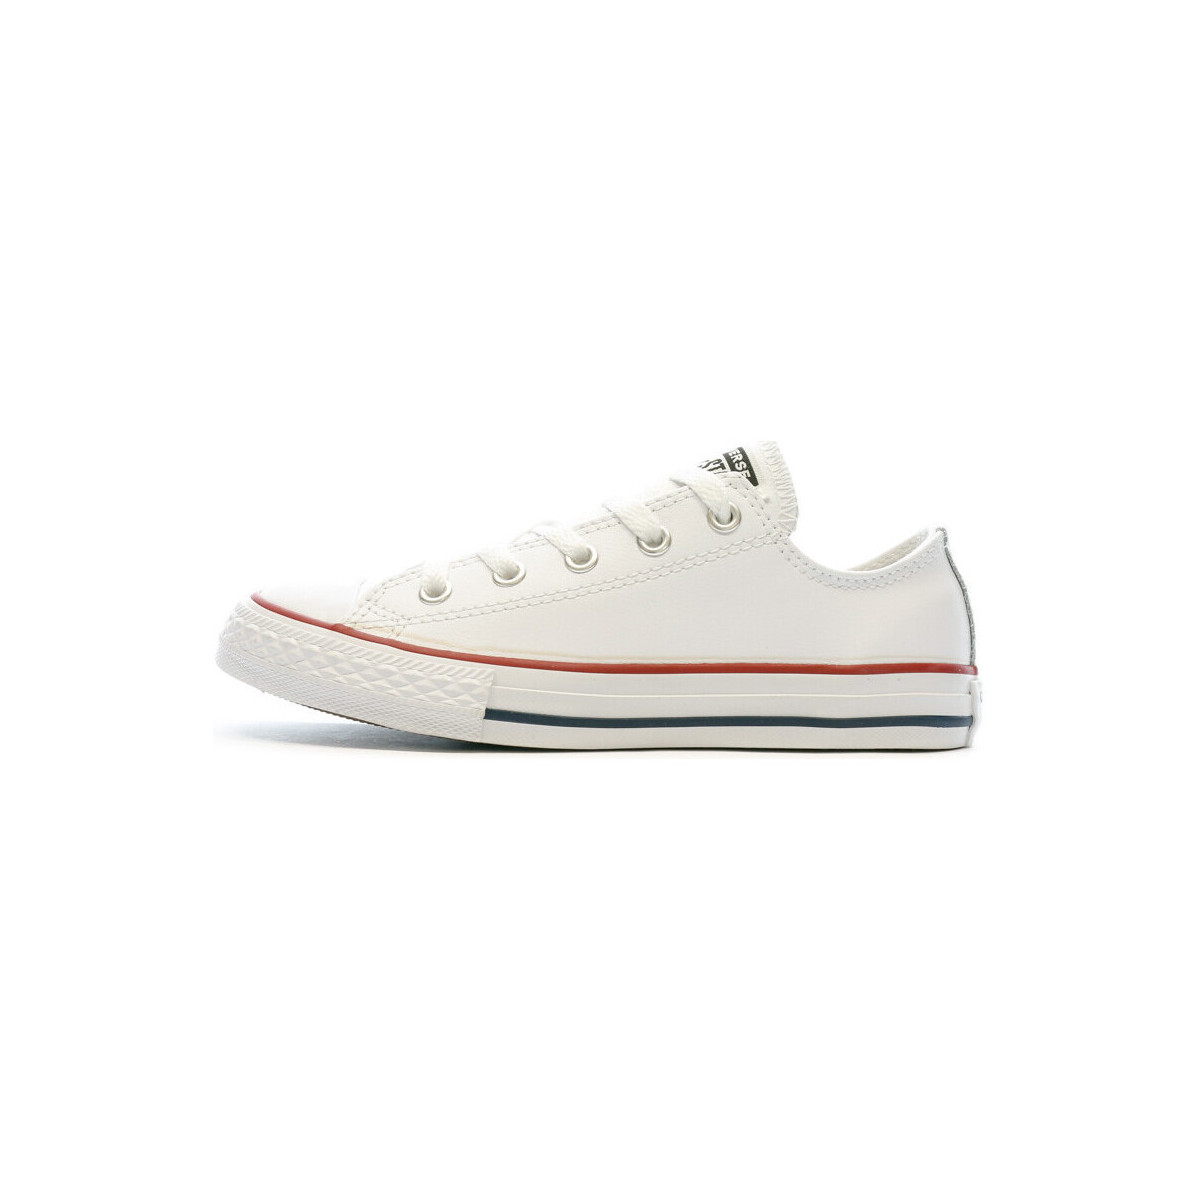 Chaussures Fille Baskets basses Converse 335892C Blanc